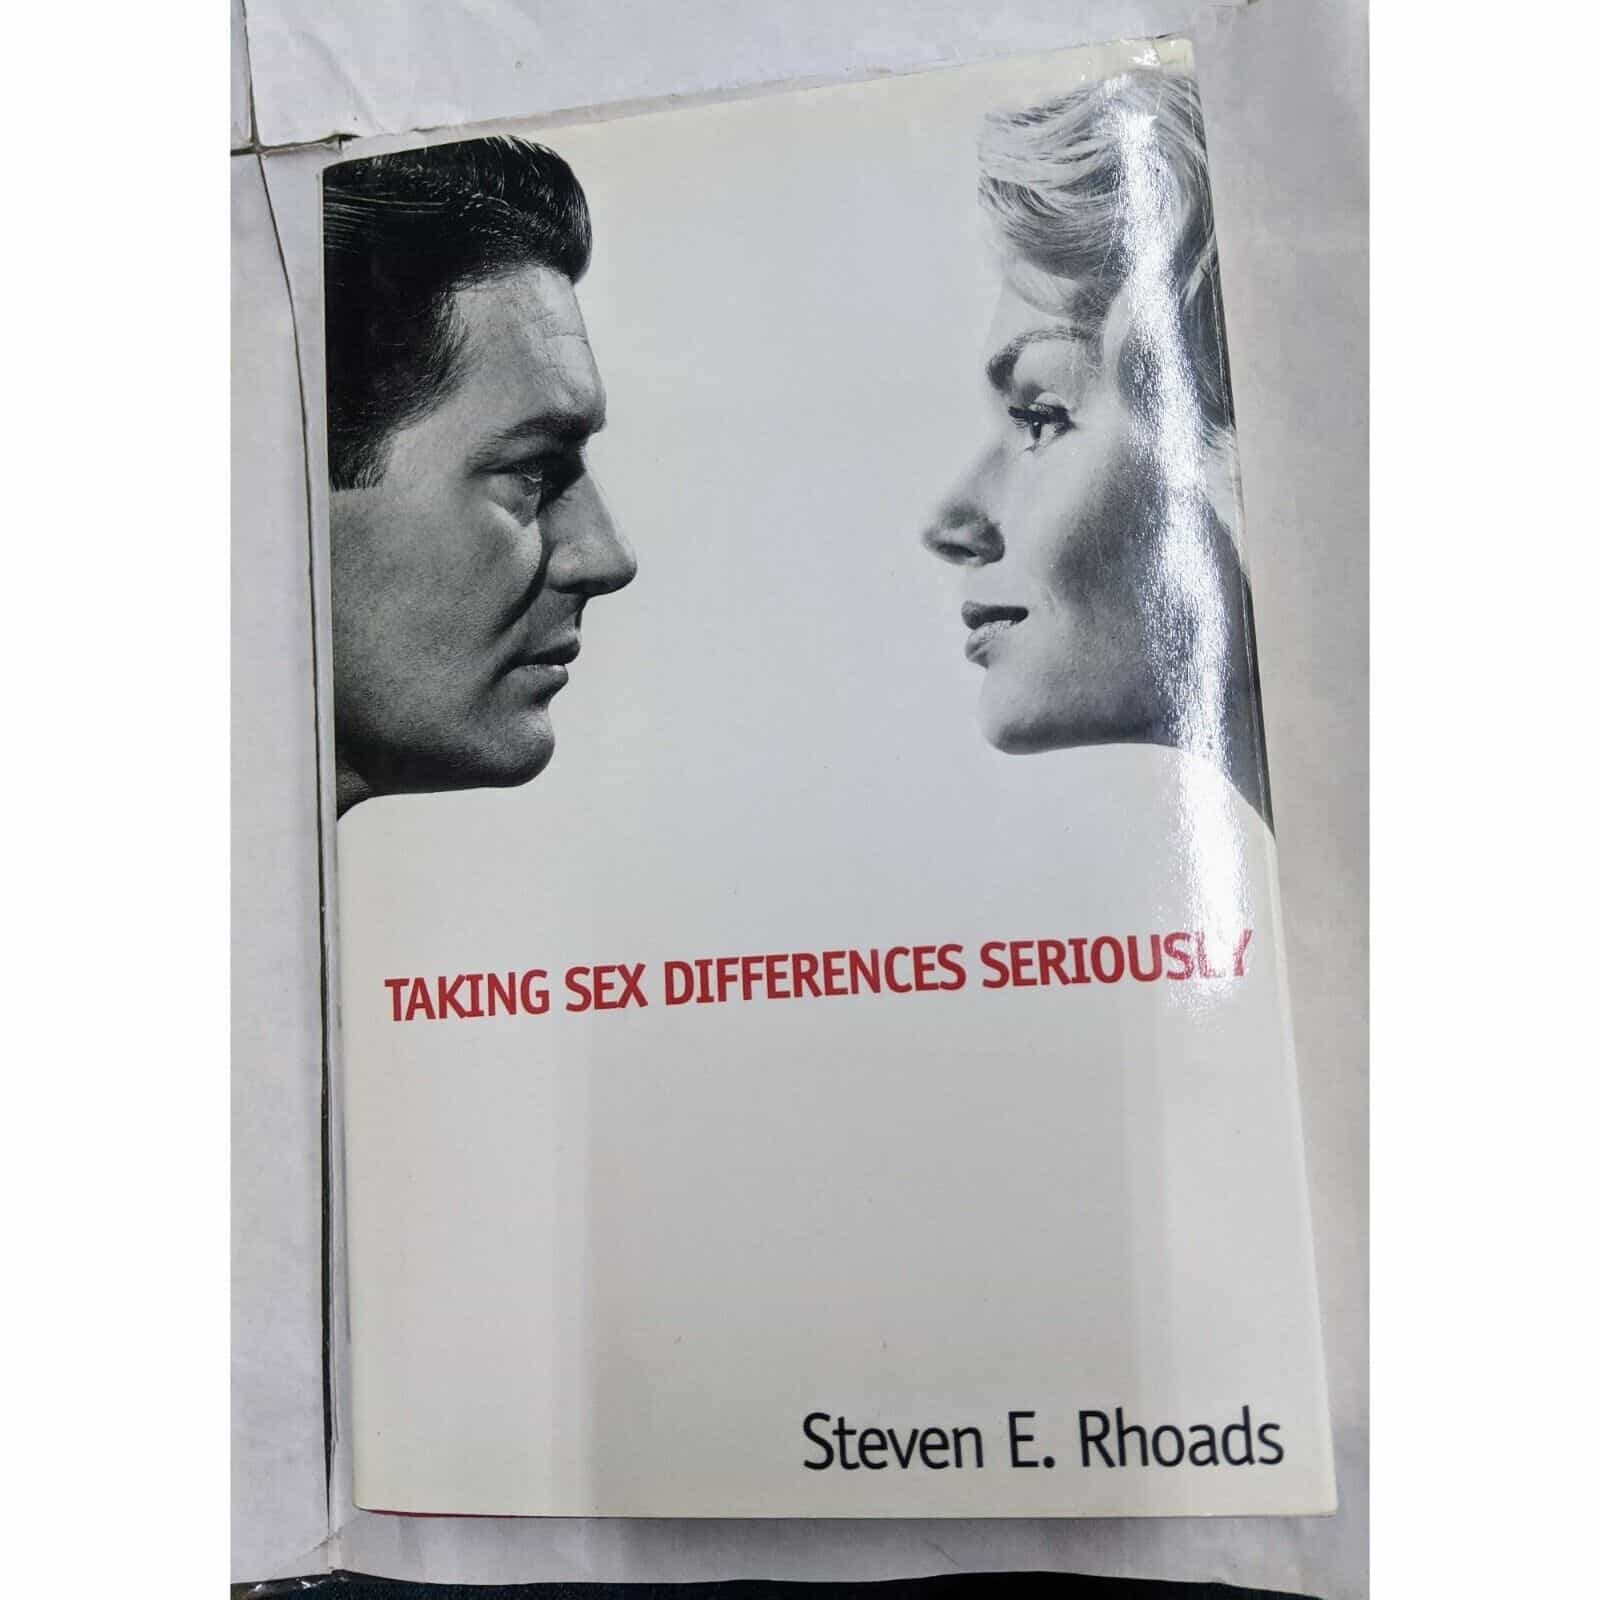 Taking Sex Differences Seriously by Steven E. Rhoads